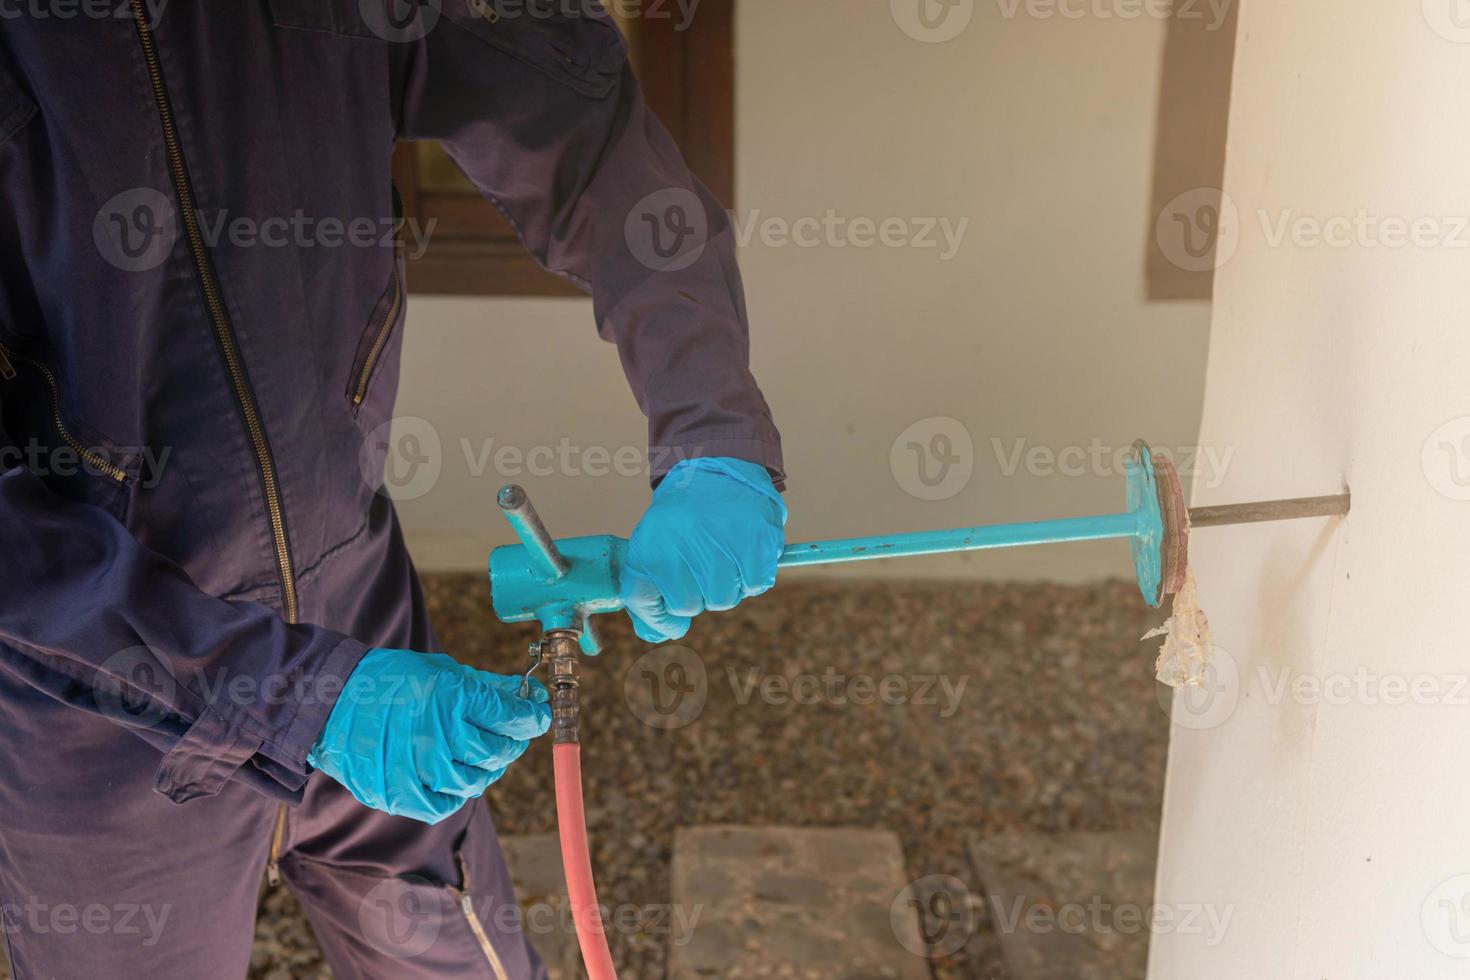 exterminate termite control company employee is using a termite sprayer at customer's house and searching for termite nests to eliminate. exterminate control worker spraying chemical insect repellant photo